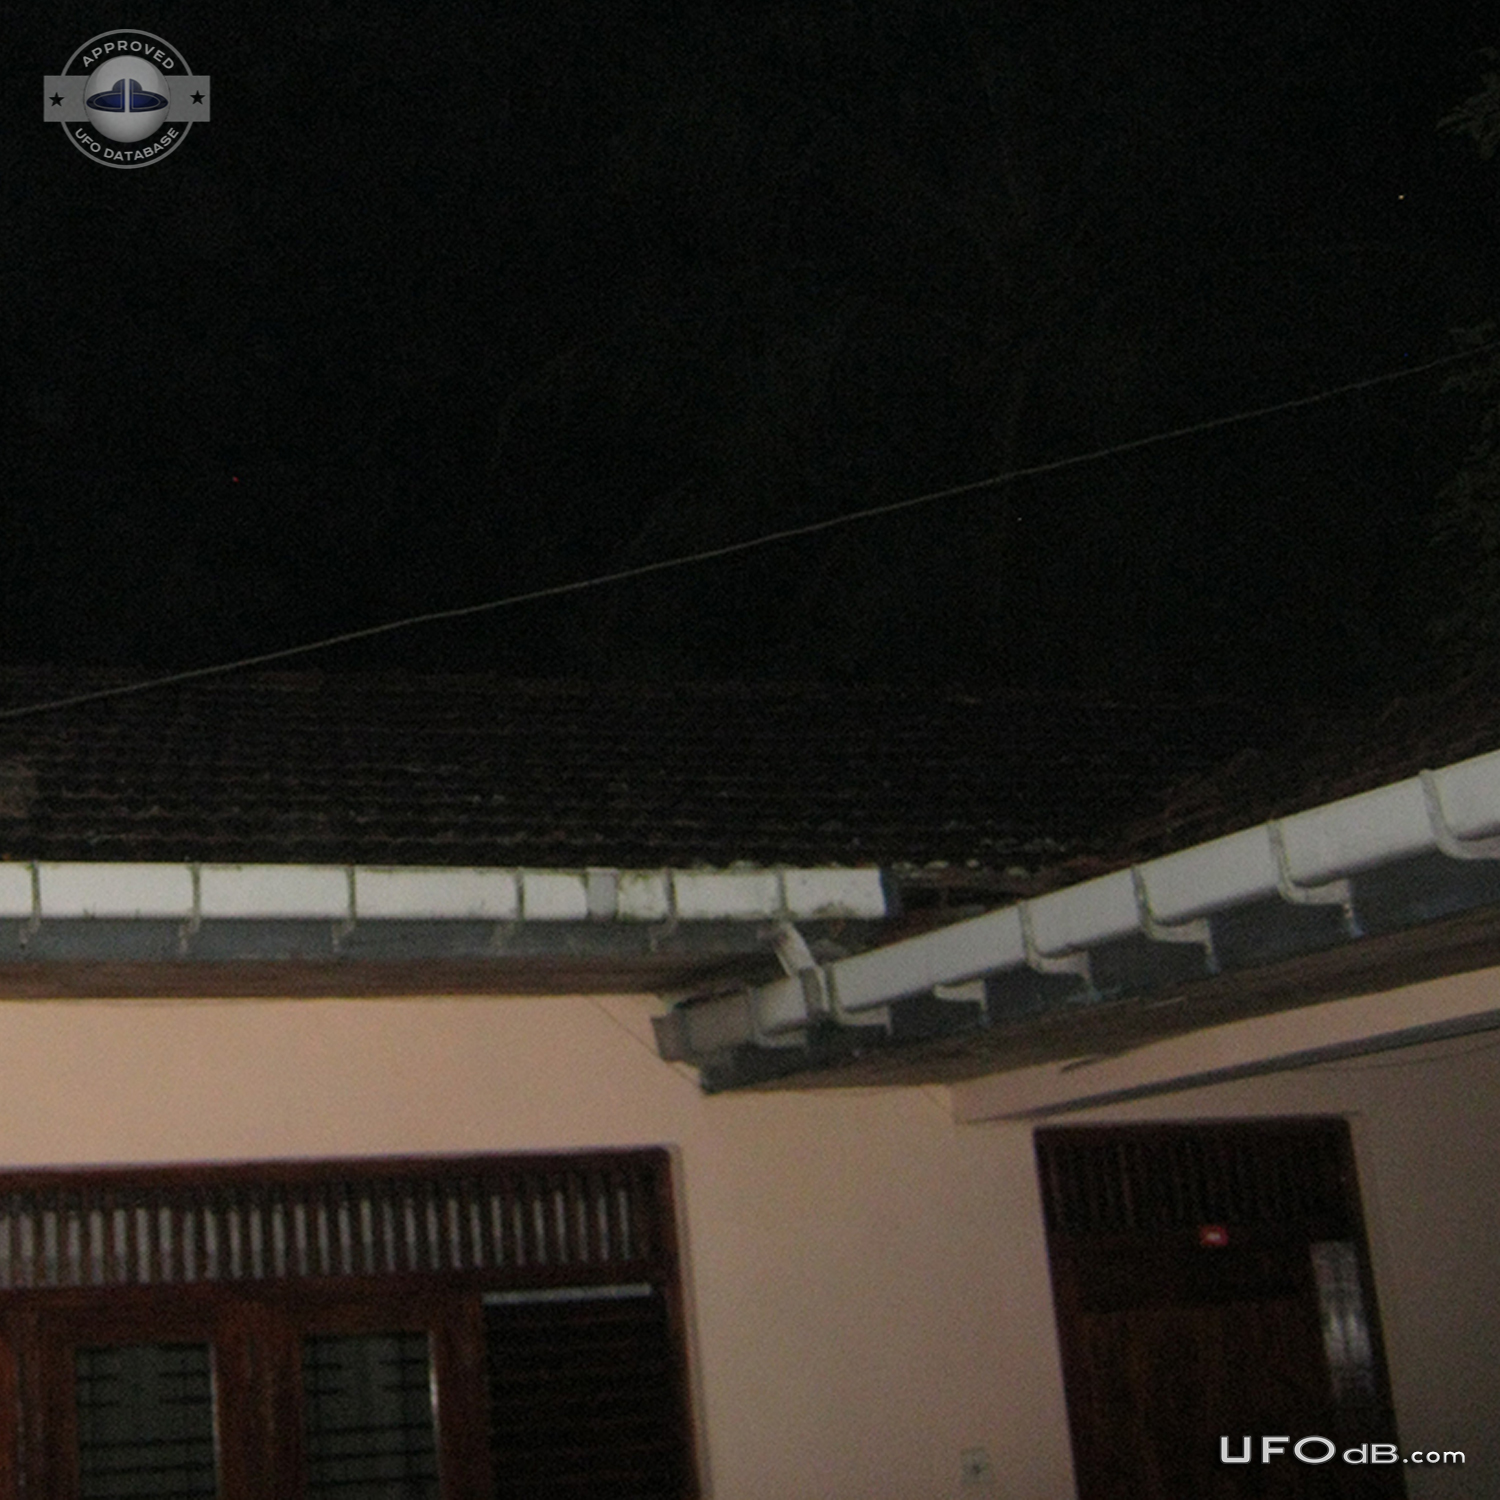 UFO over South sky in Gampaha Sri Lanka Changing Red,Blue,White lights UFO Picture #606-9